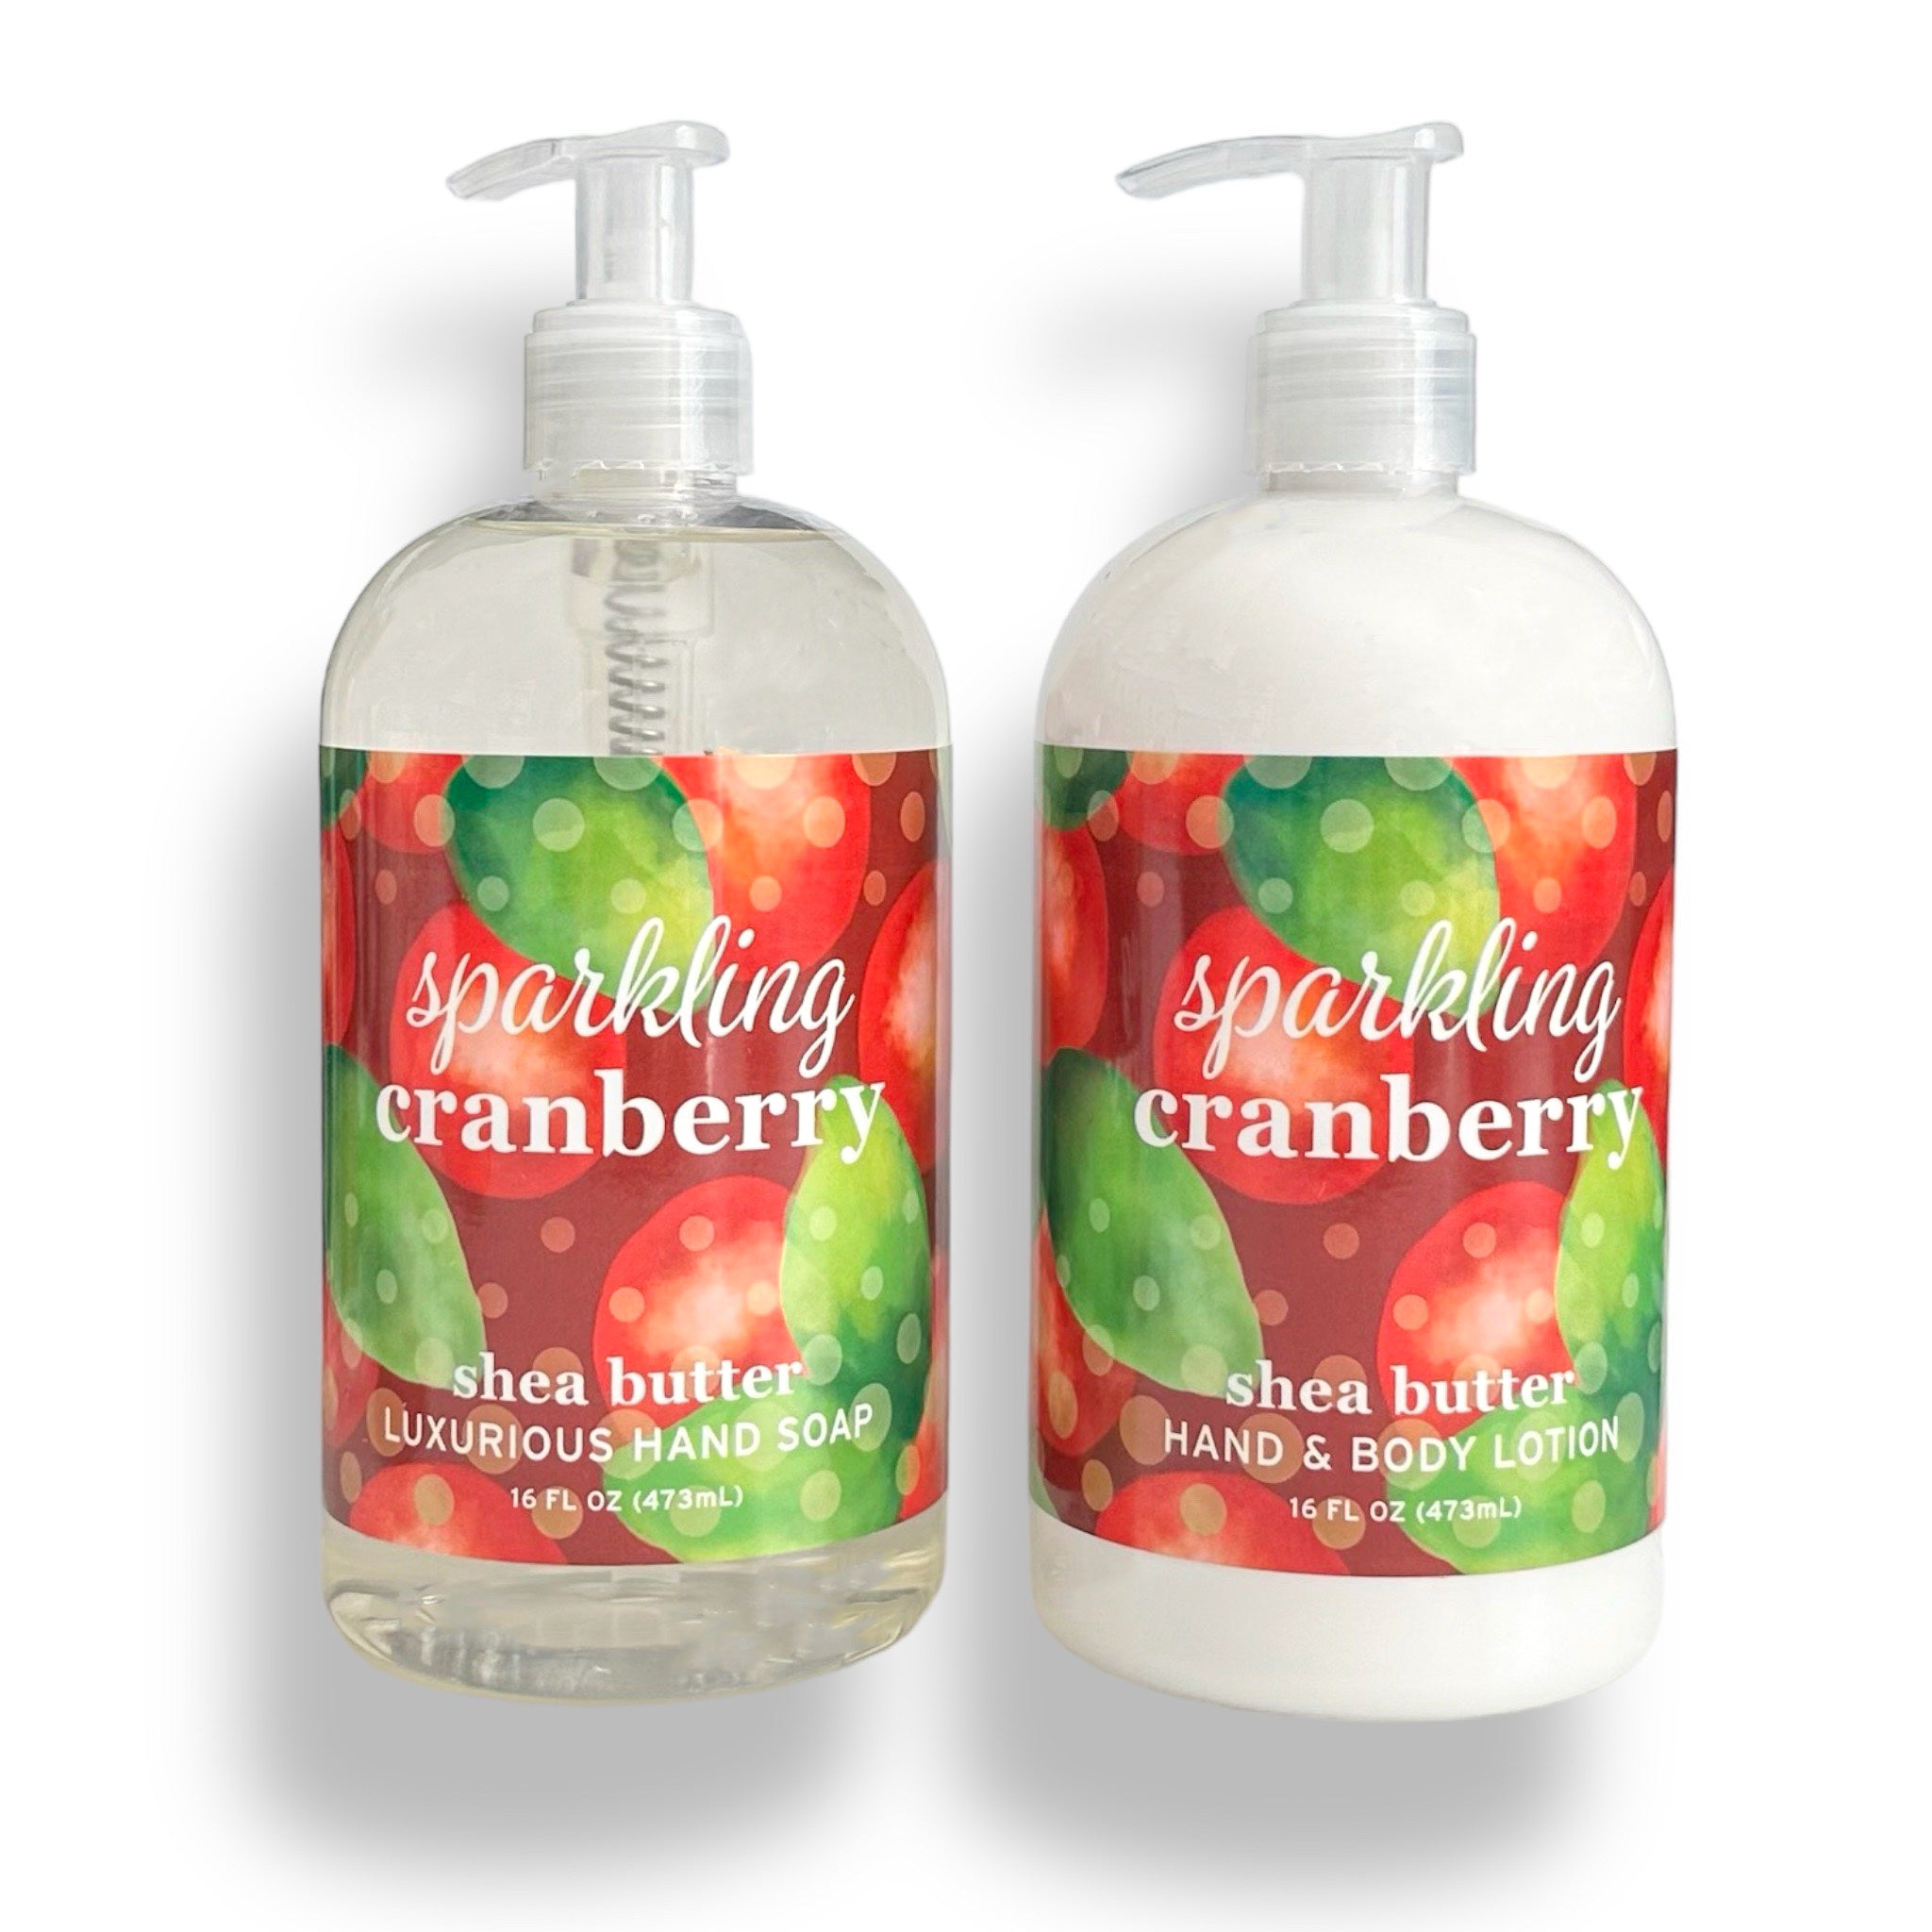 Greenwich Bay Trading Company SPARKLING CRANBERRY Hand Soap